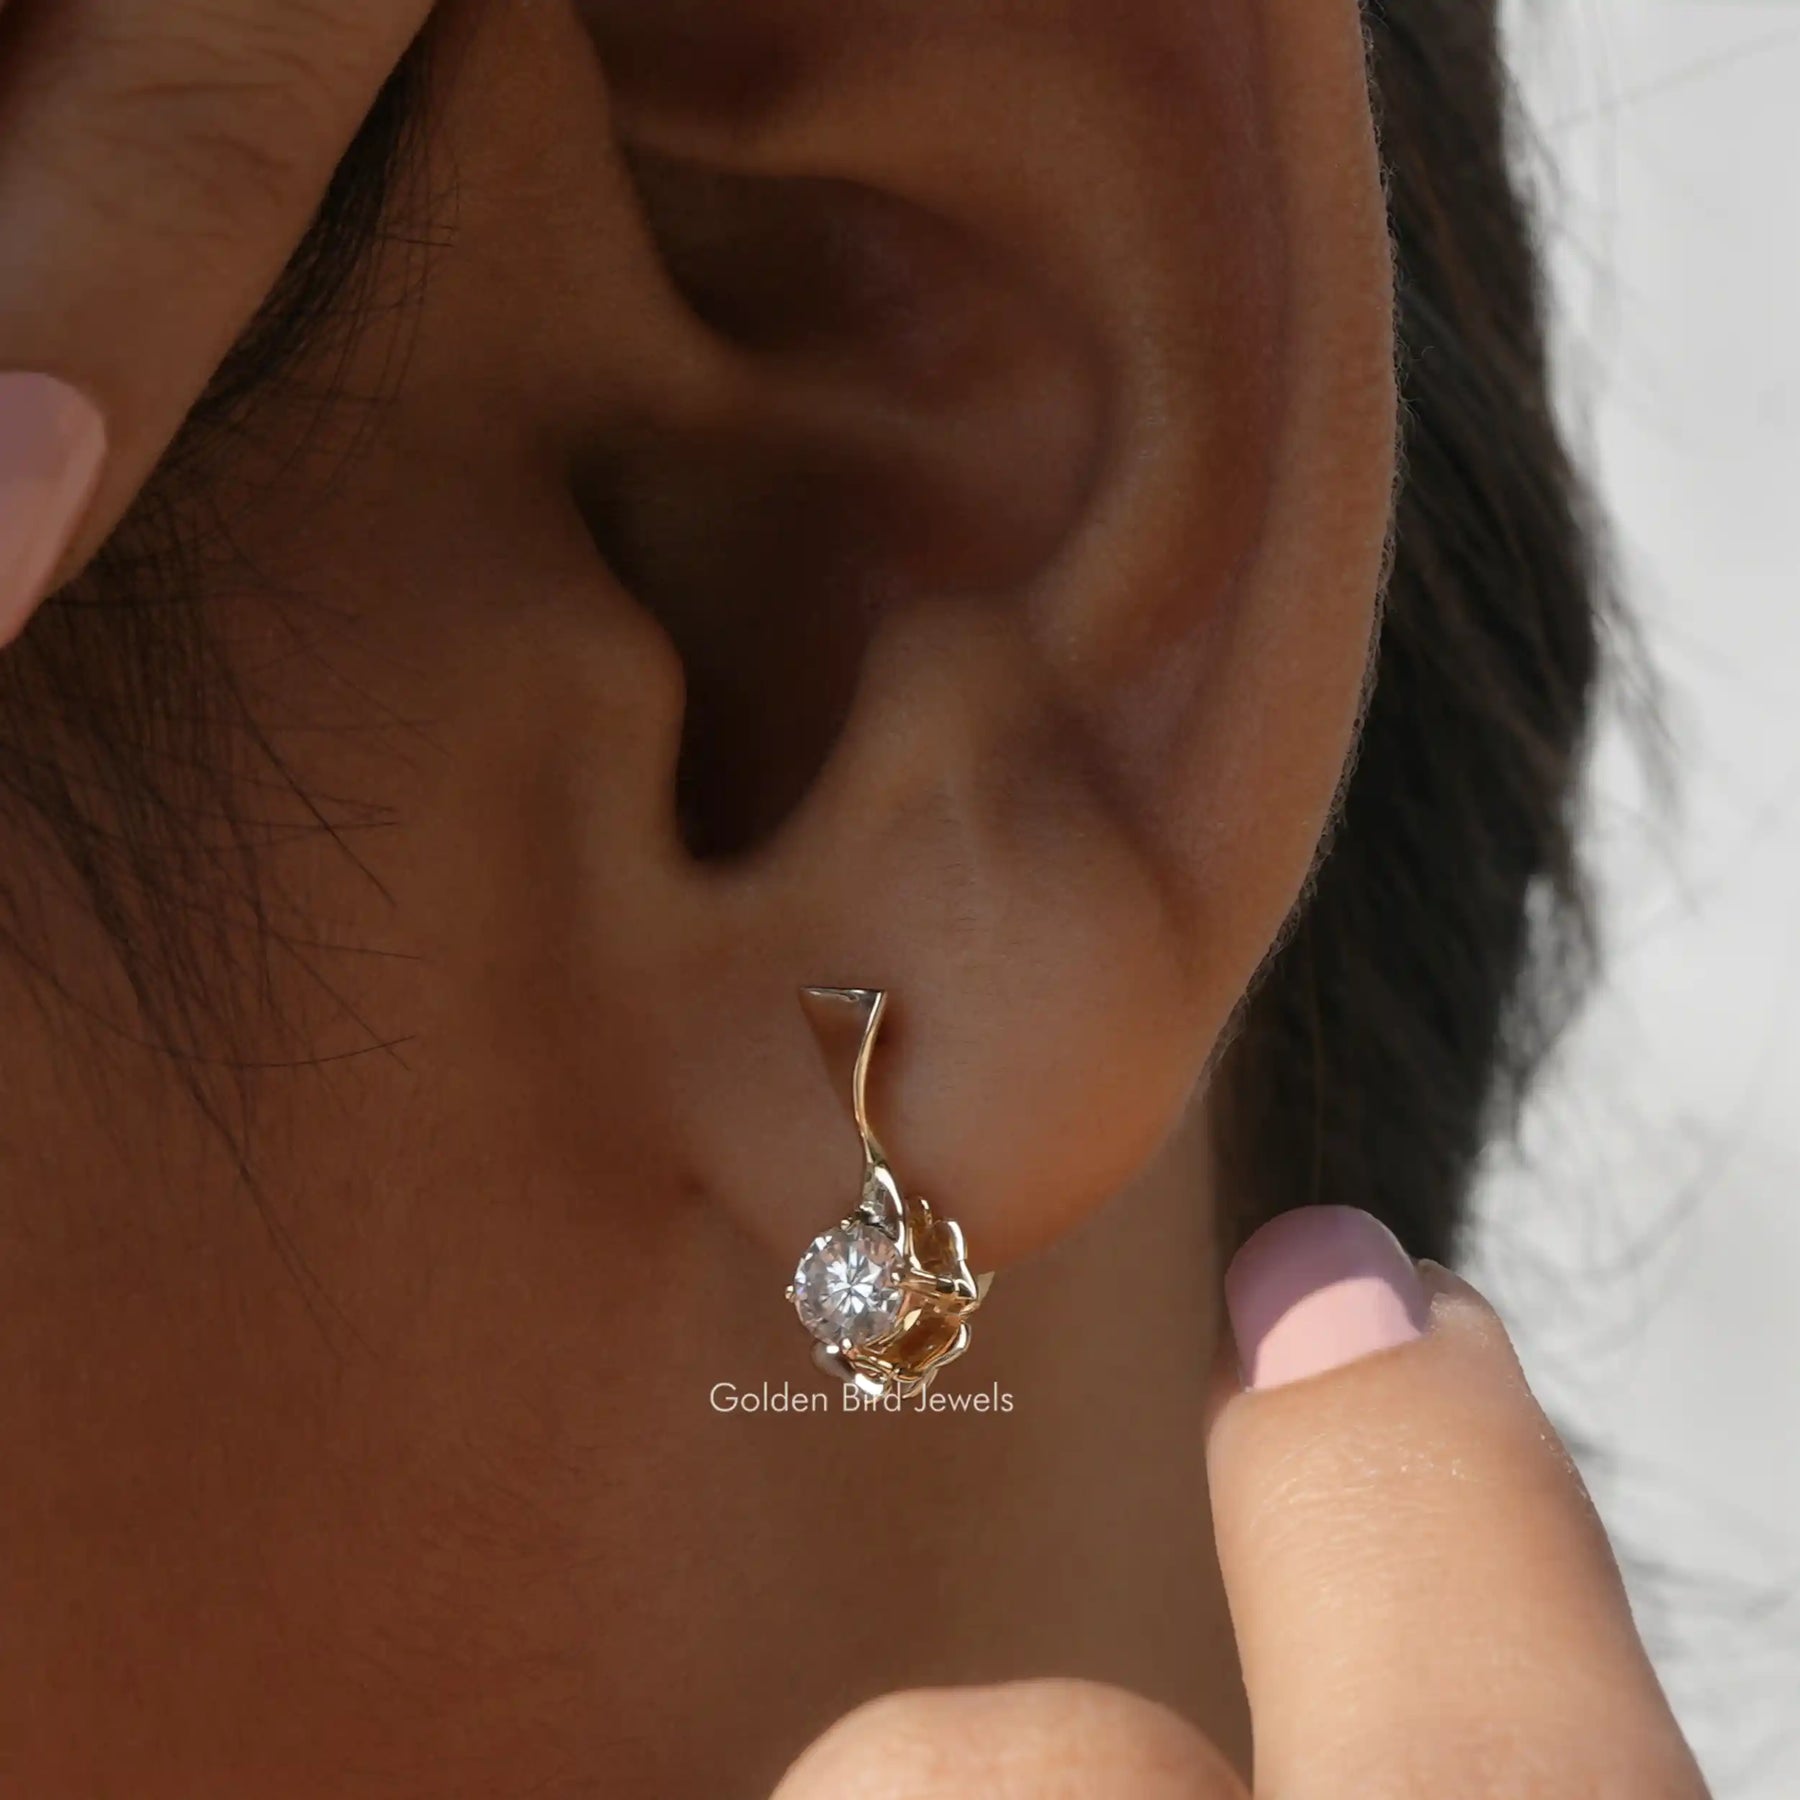 [This round cut earrings made of colorless]-[Golden Bird Jewels]